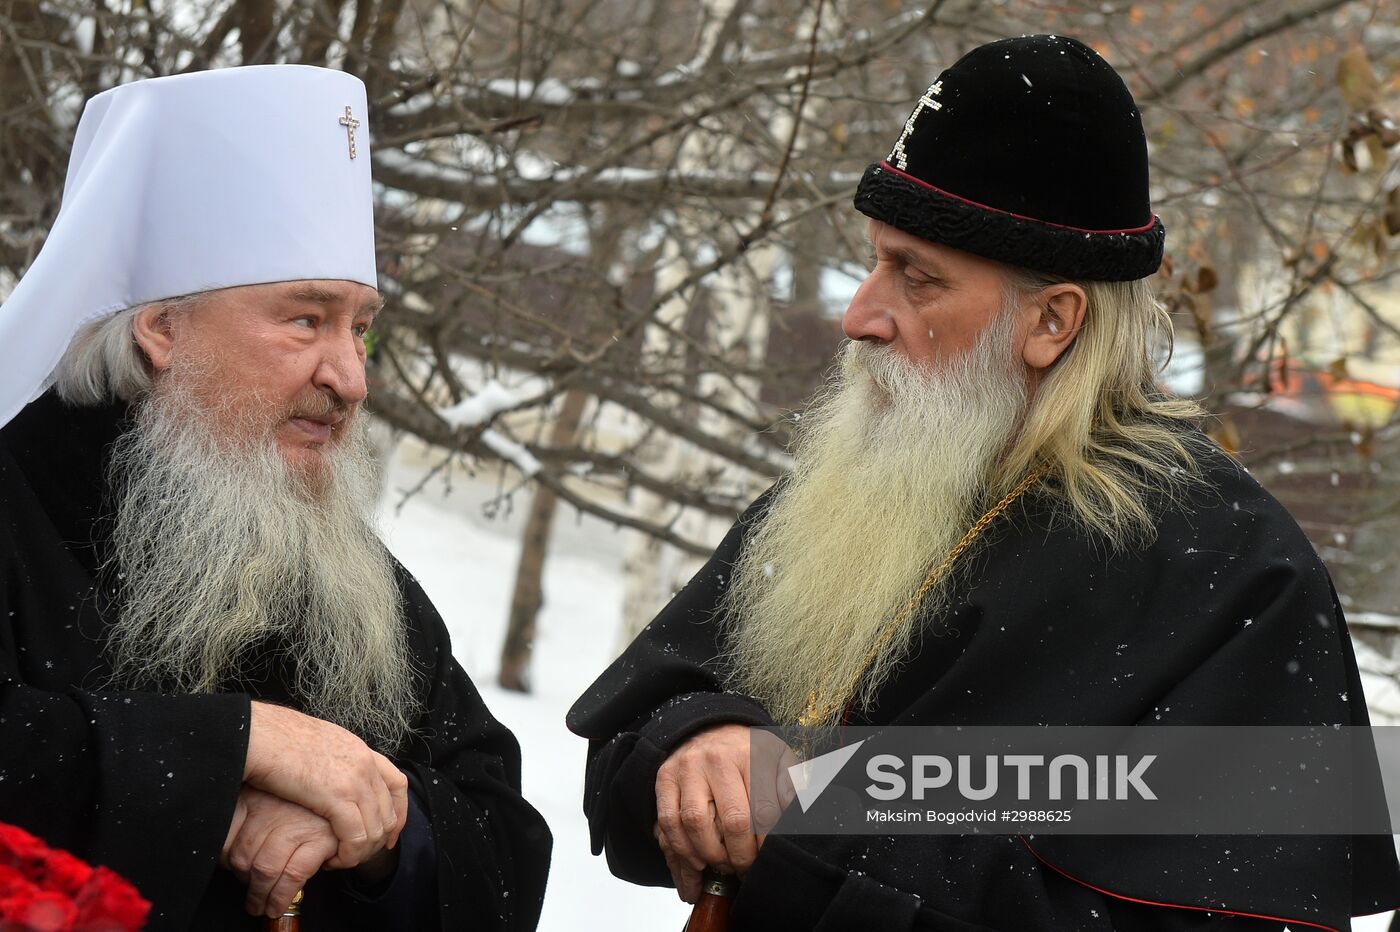 Monument to Metropolitan Andrian of Russian Orthodox Old Believers Church unveiled in Kazan